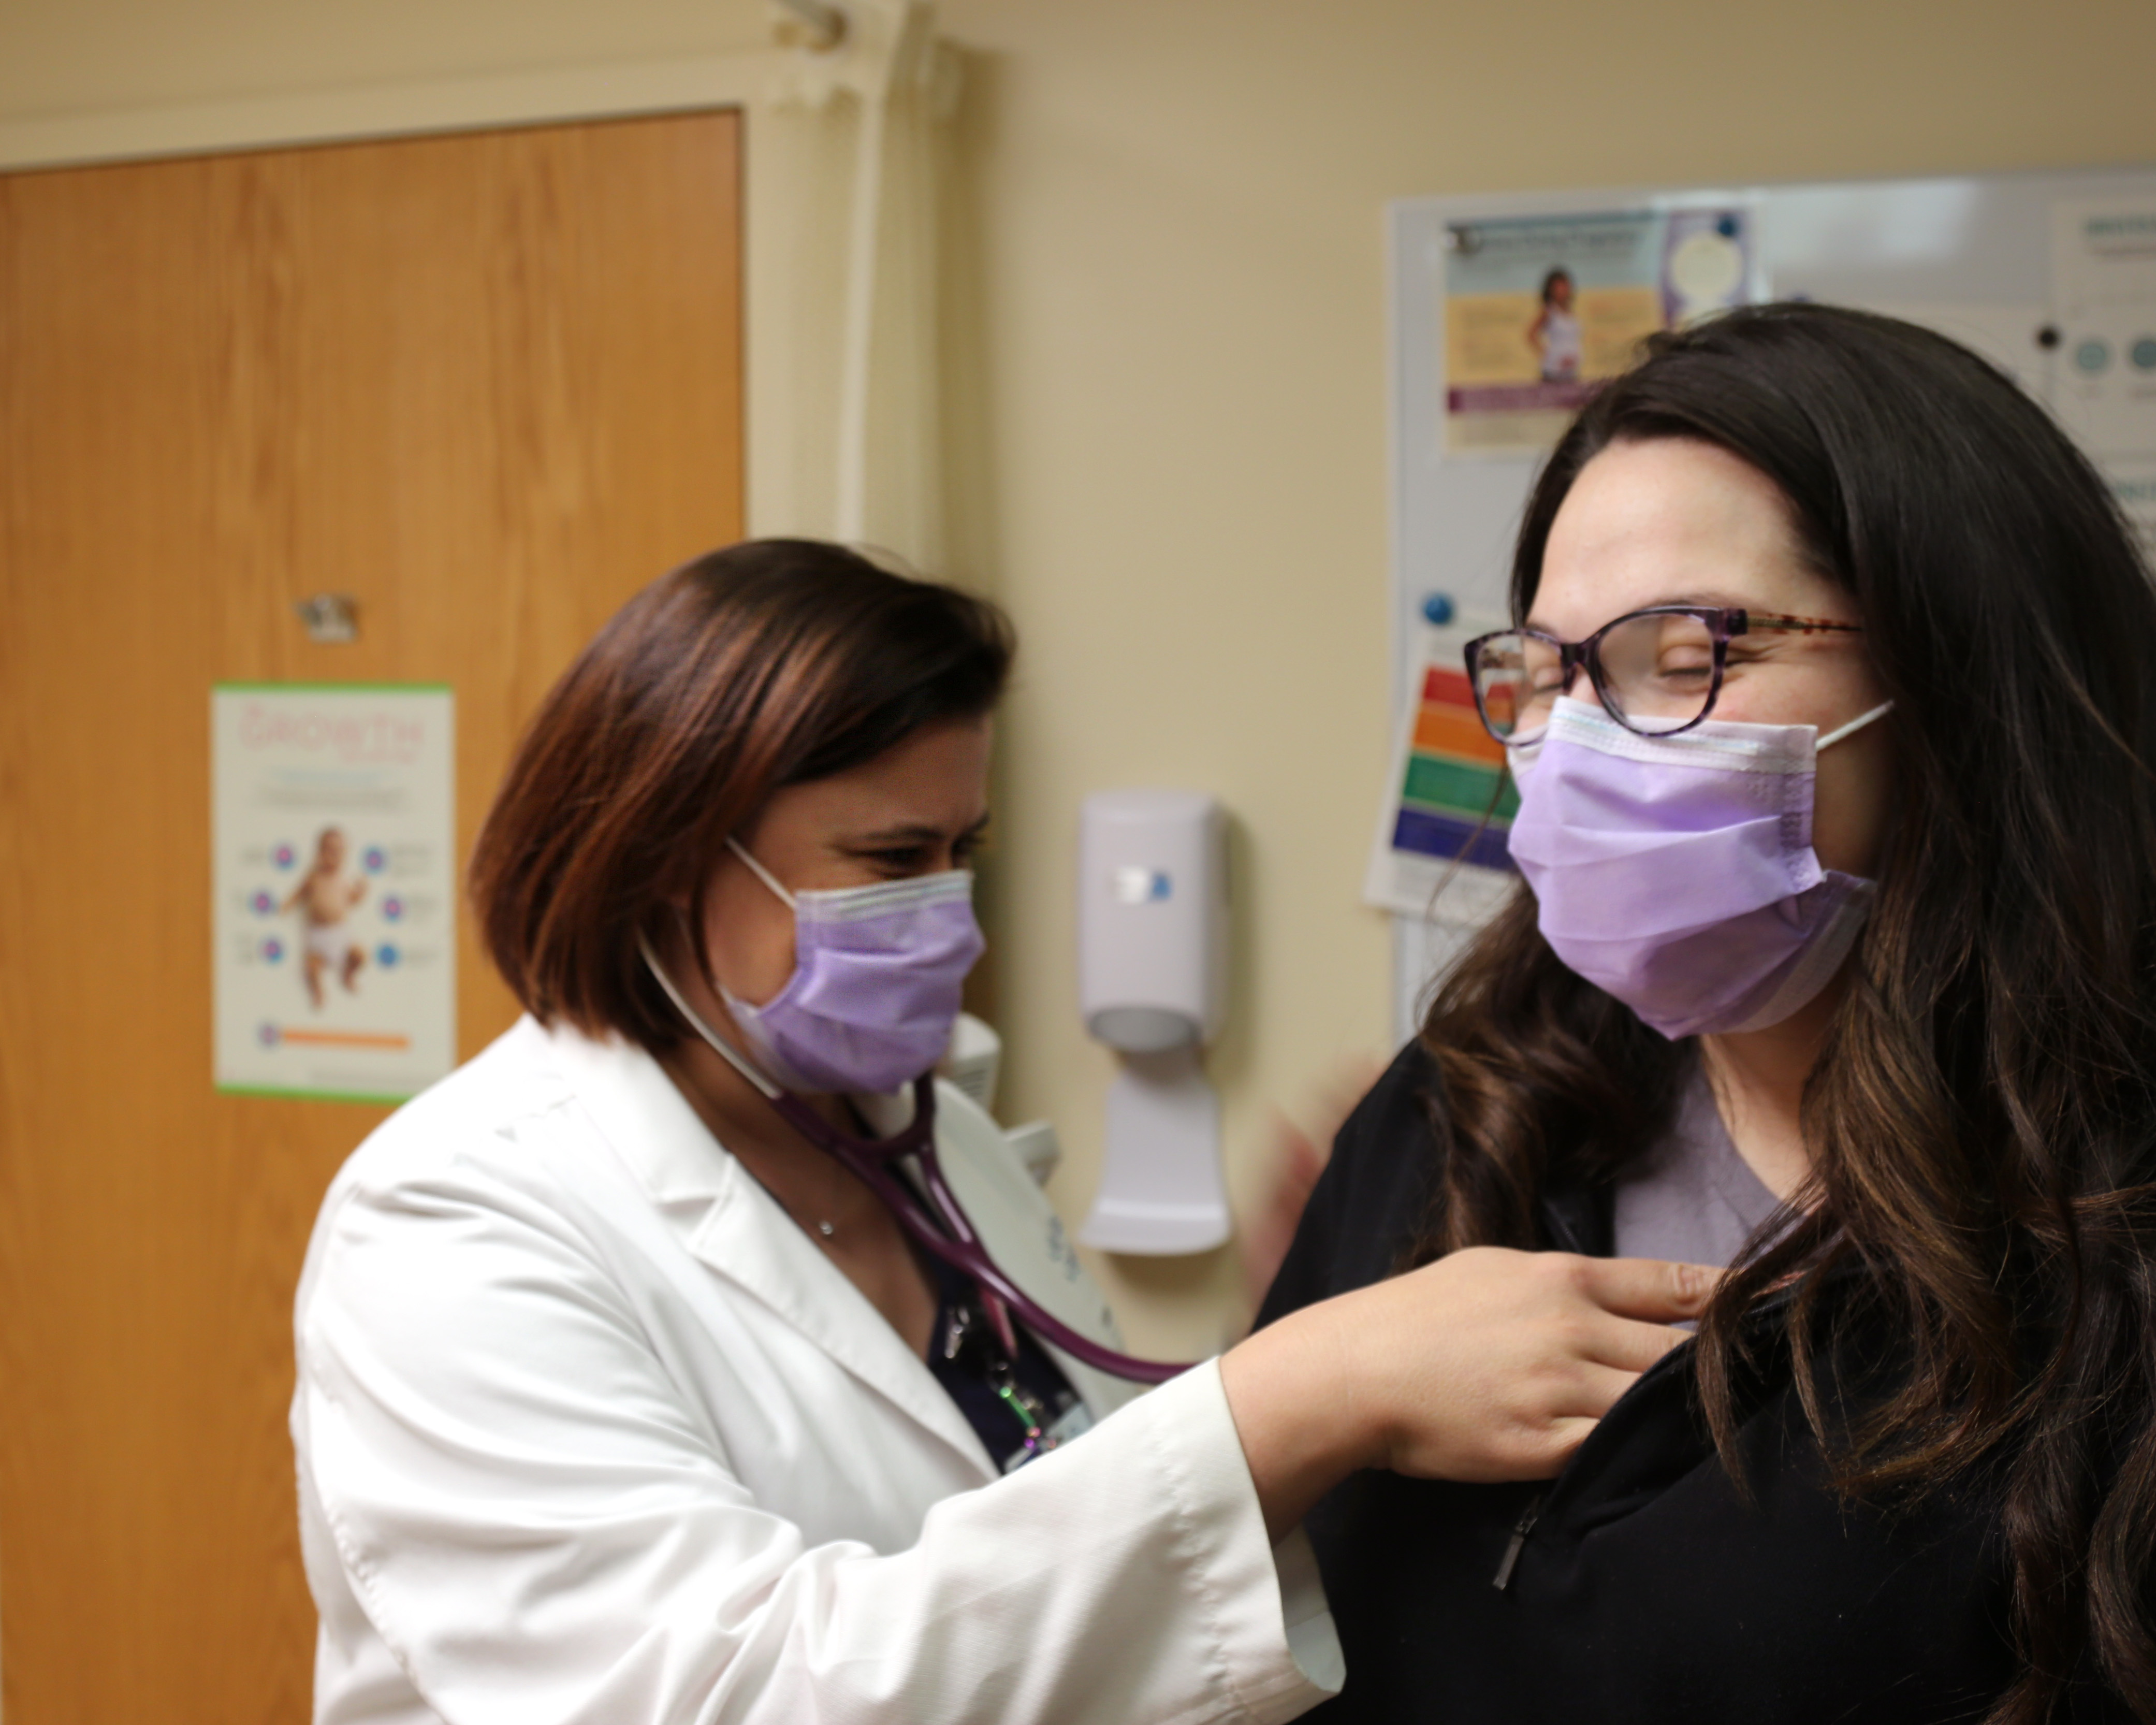 Dr. Jenny Pennycook, OB/GYN, with a patient